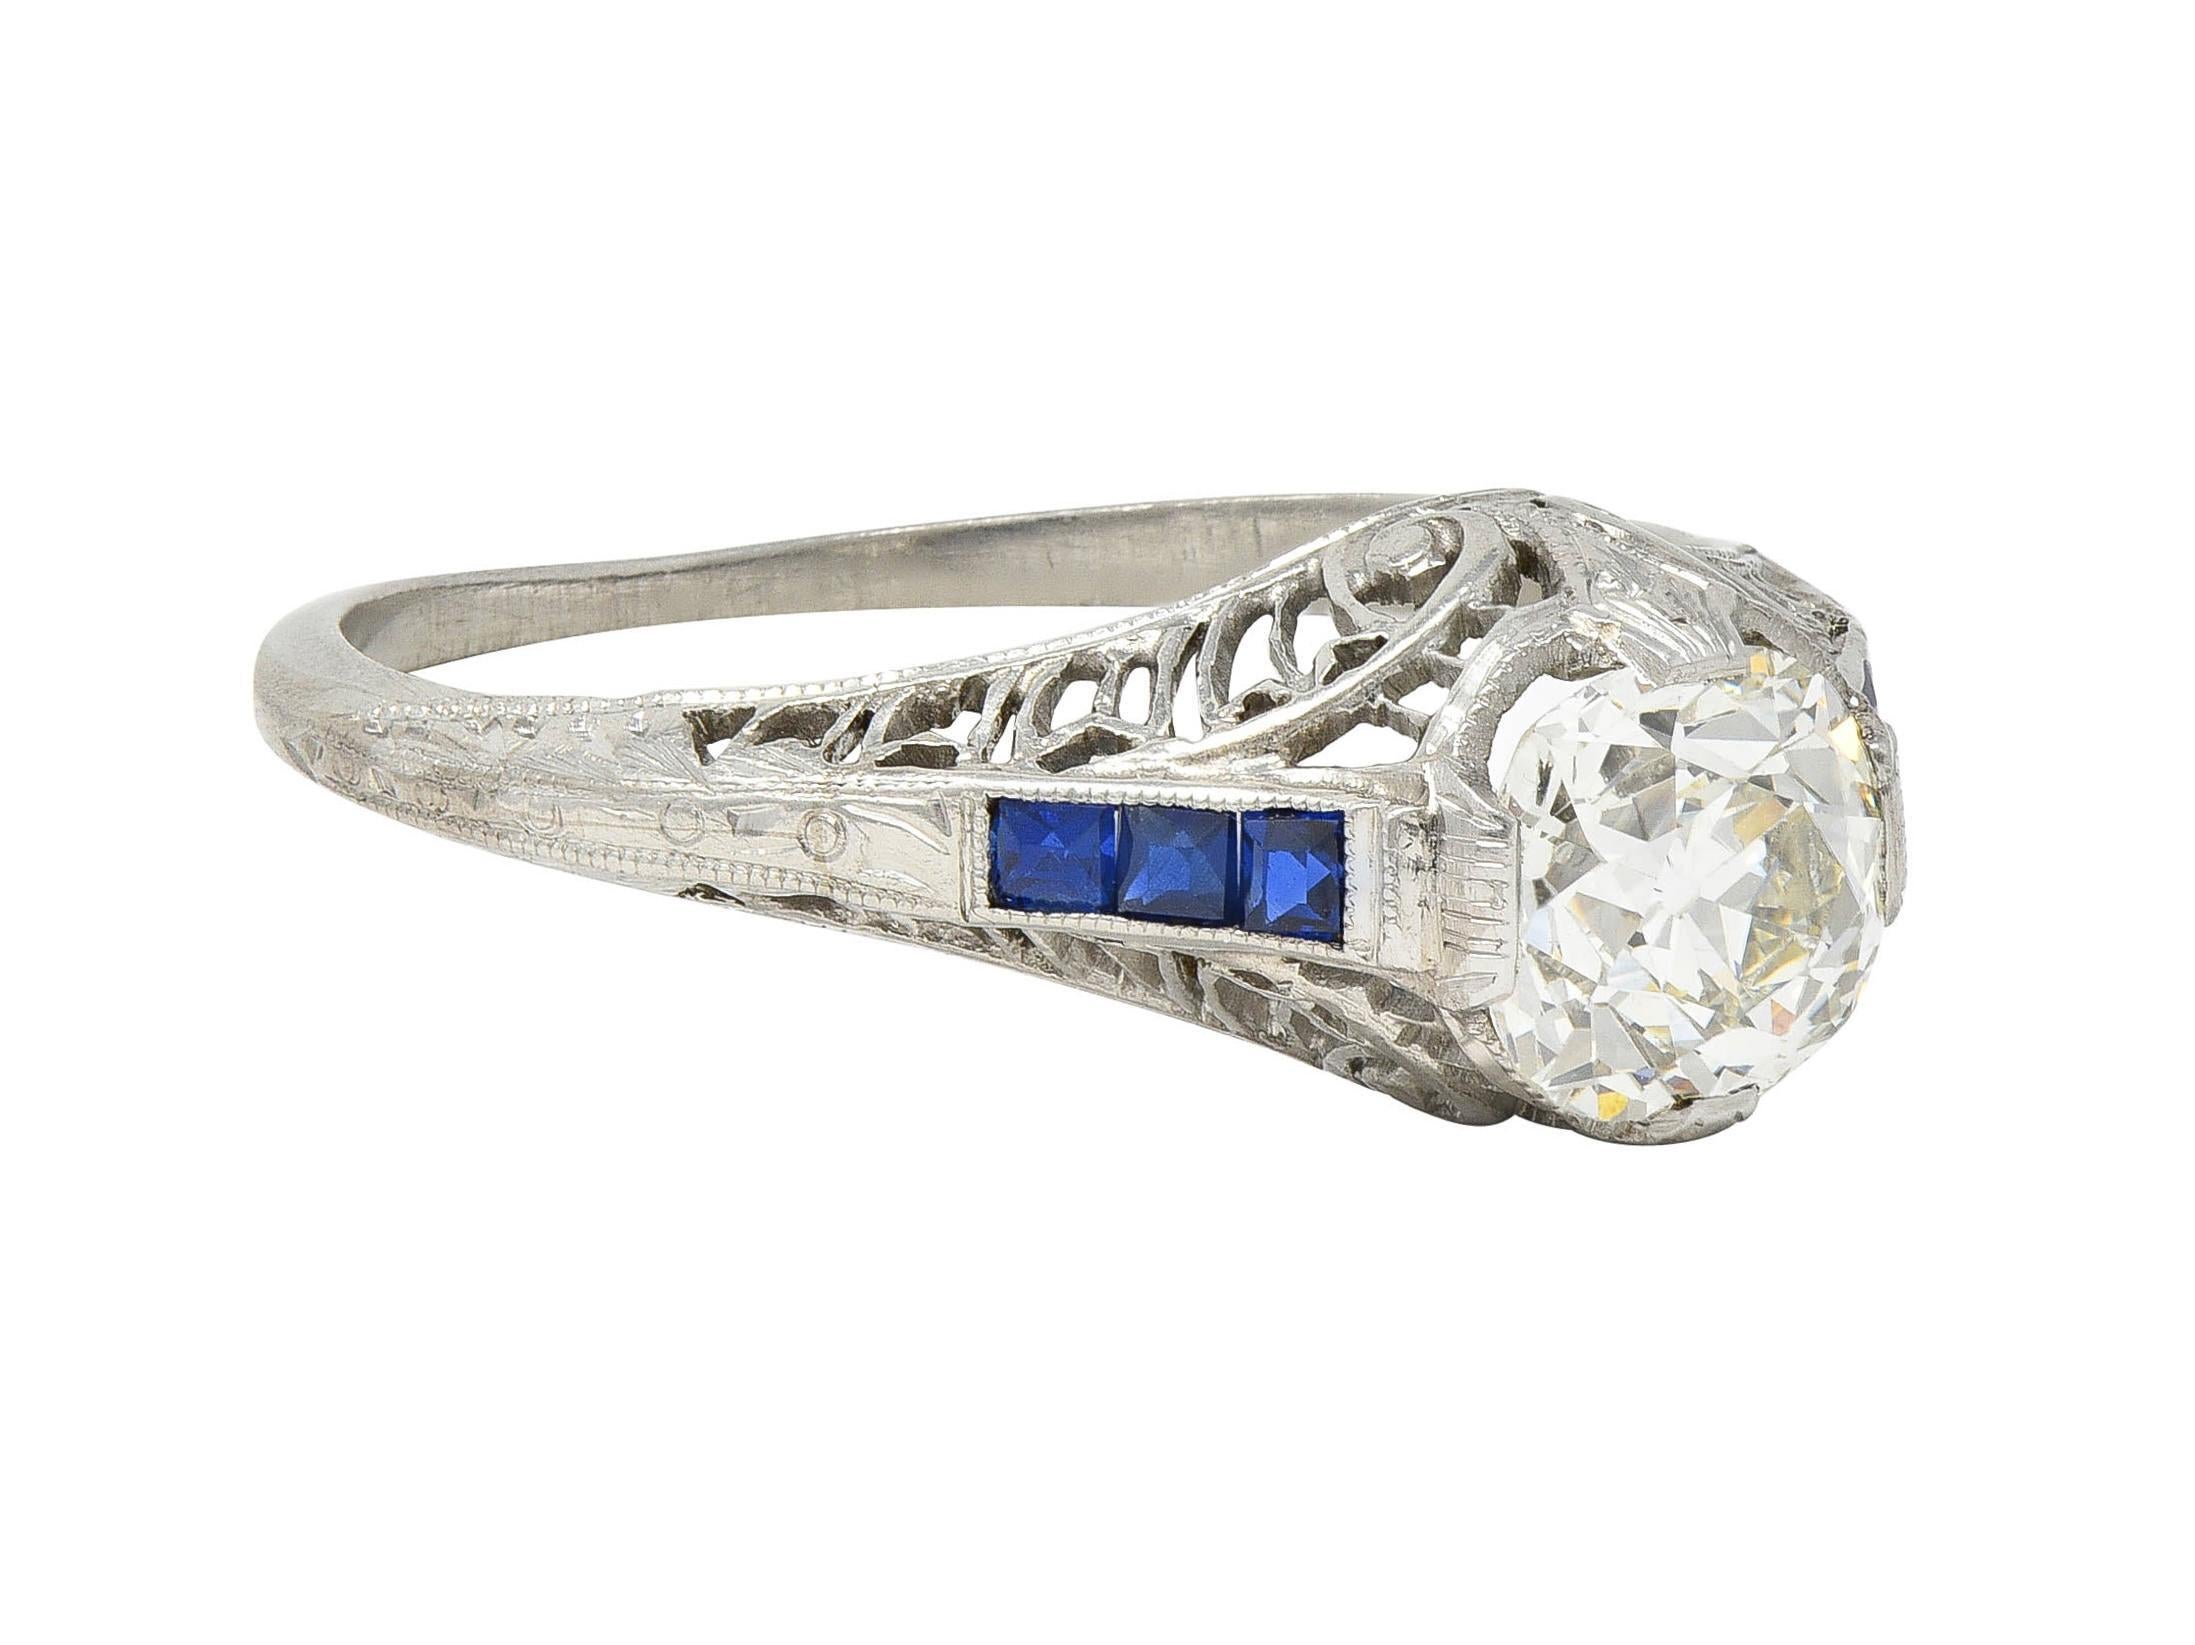 Centering an old mine cut diamond weighing approximately 1.28 carats - K color with VS2 clarity
Set with engraved wide prongs with a pierced scrolling plume motif gallery 
Flanked by rows of step cut sapphires channel set in shoulders
Weighing